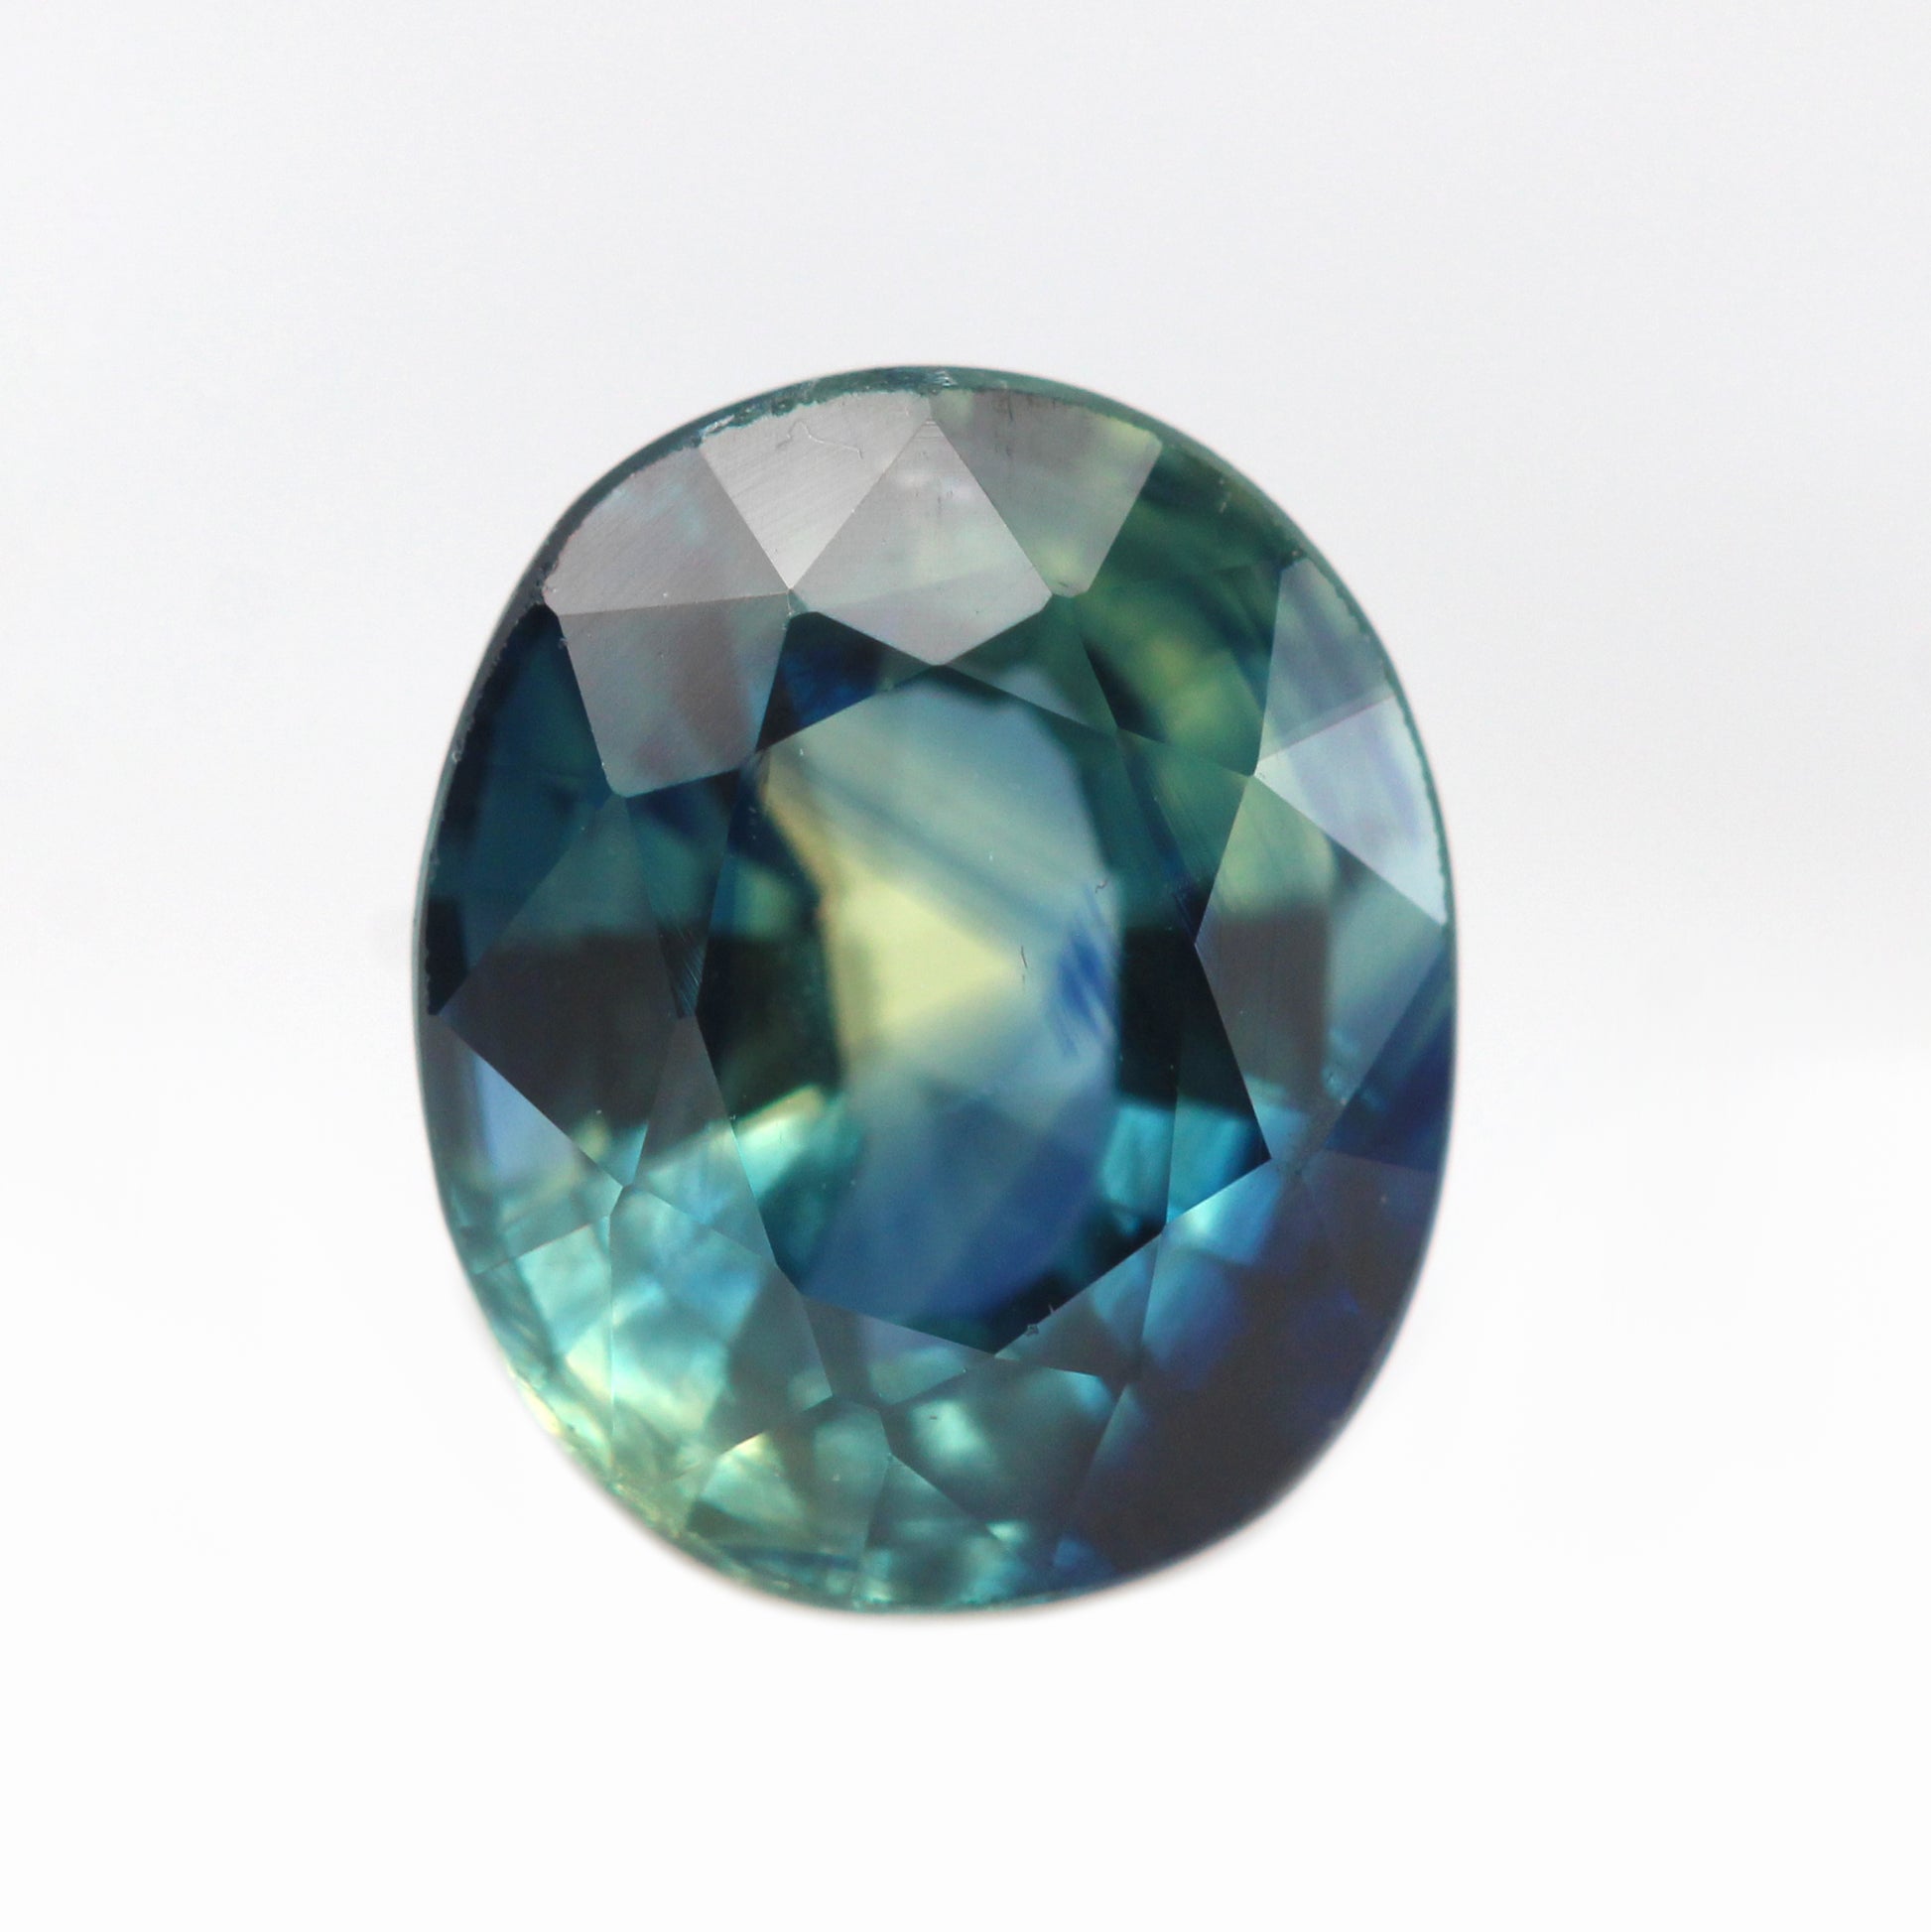 1.14 Carat Rounded Oval Teal Sapphire for Custom Work - Inventory Code TOS114 - Midwinter Co. Alternative Bridal Rings and Modern Fine Jewelry